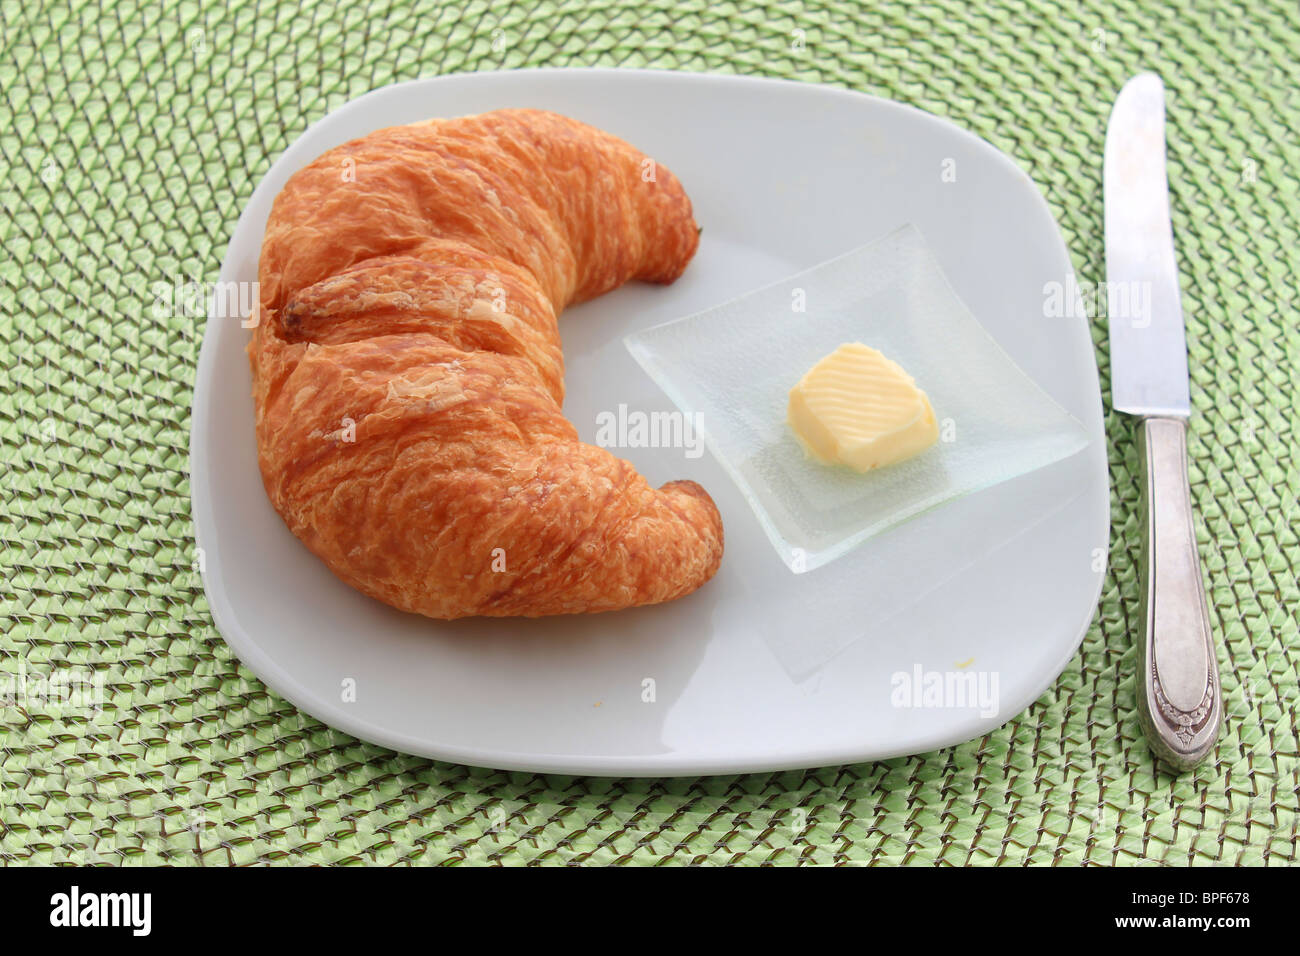 Golden croissant with orange slice on a white plate with a knife and a pat of butter on a green wicker placemat Stock Photo